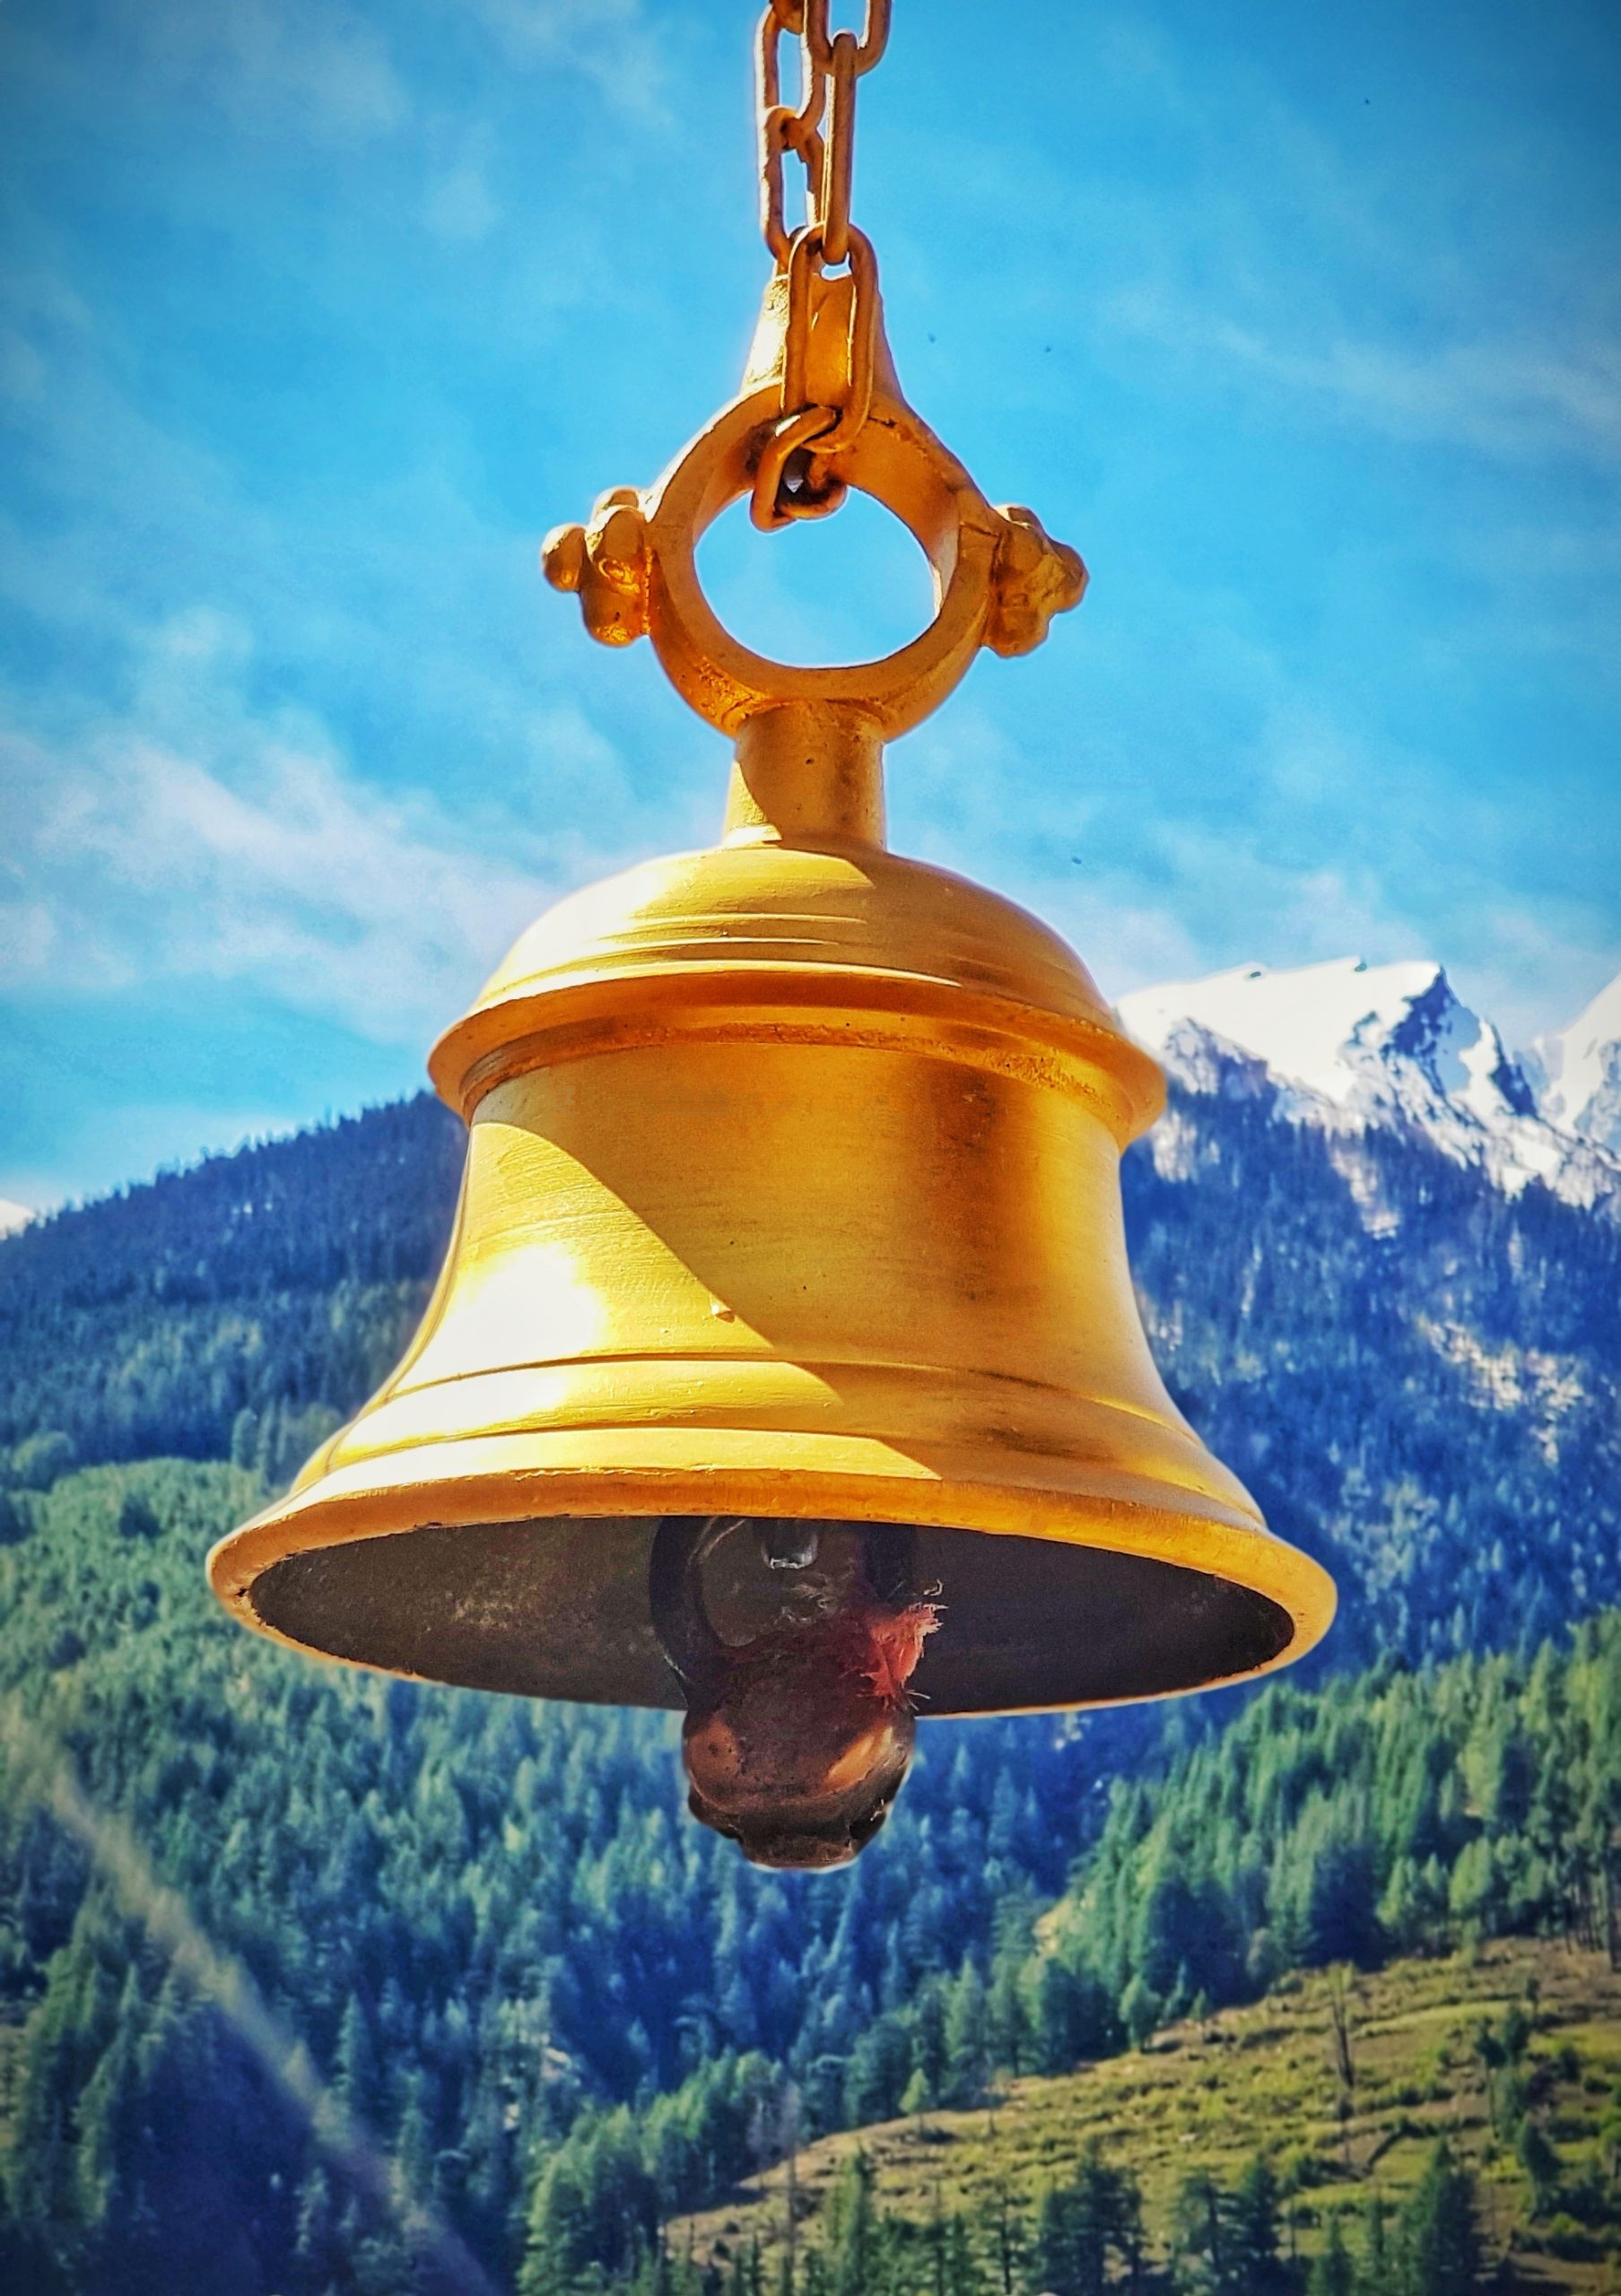 Temple bell